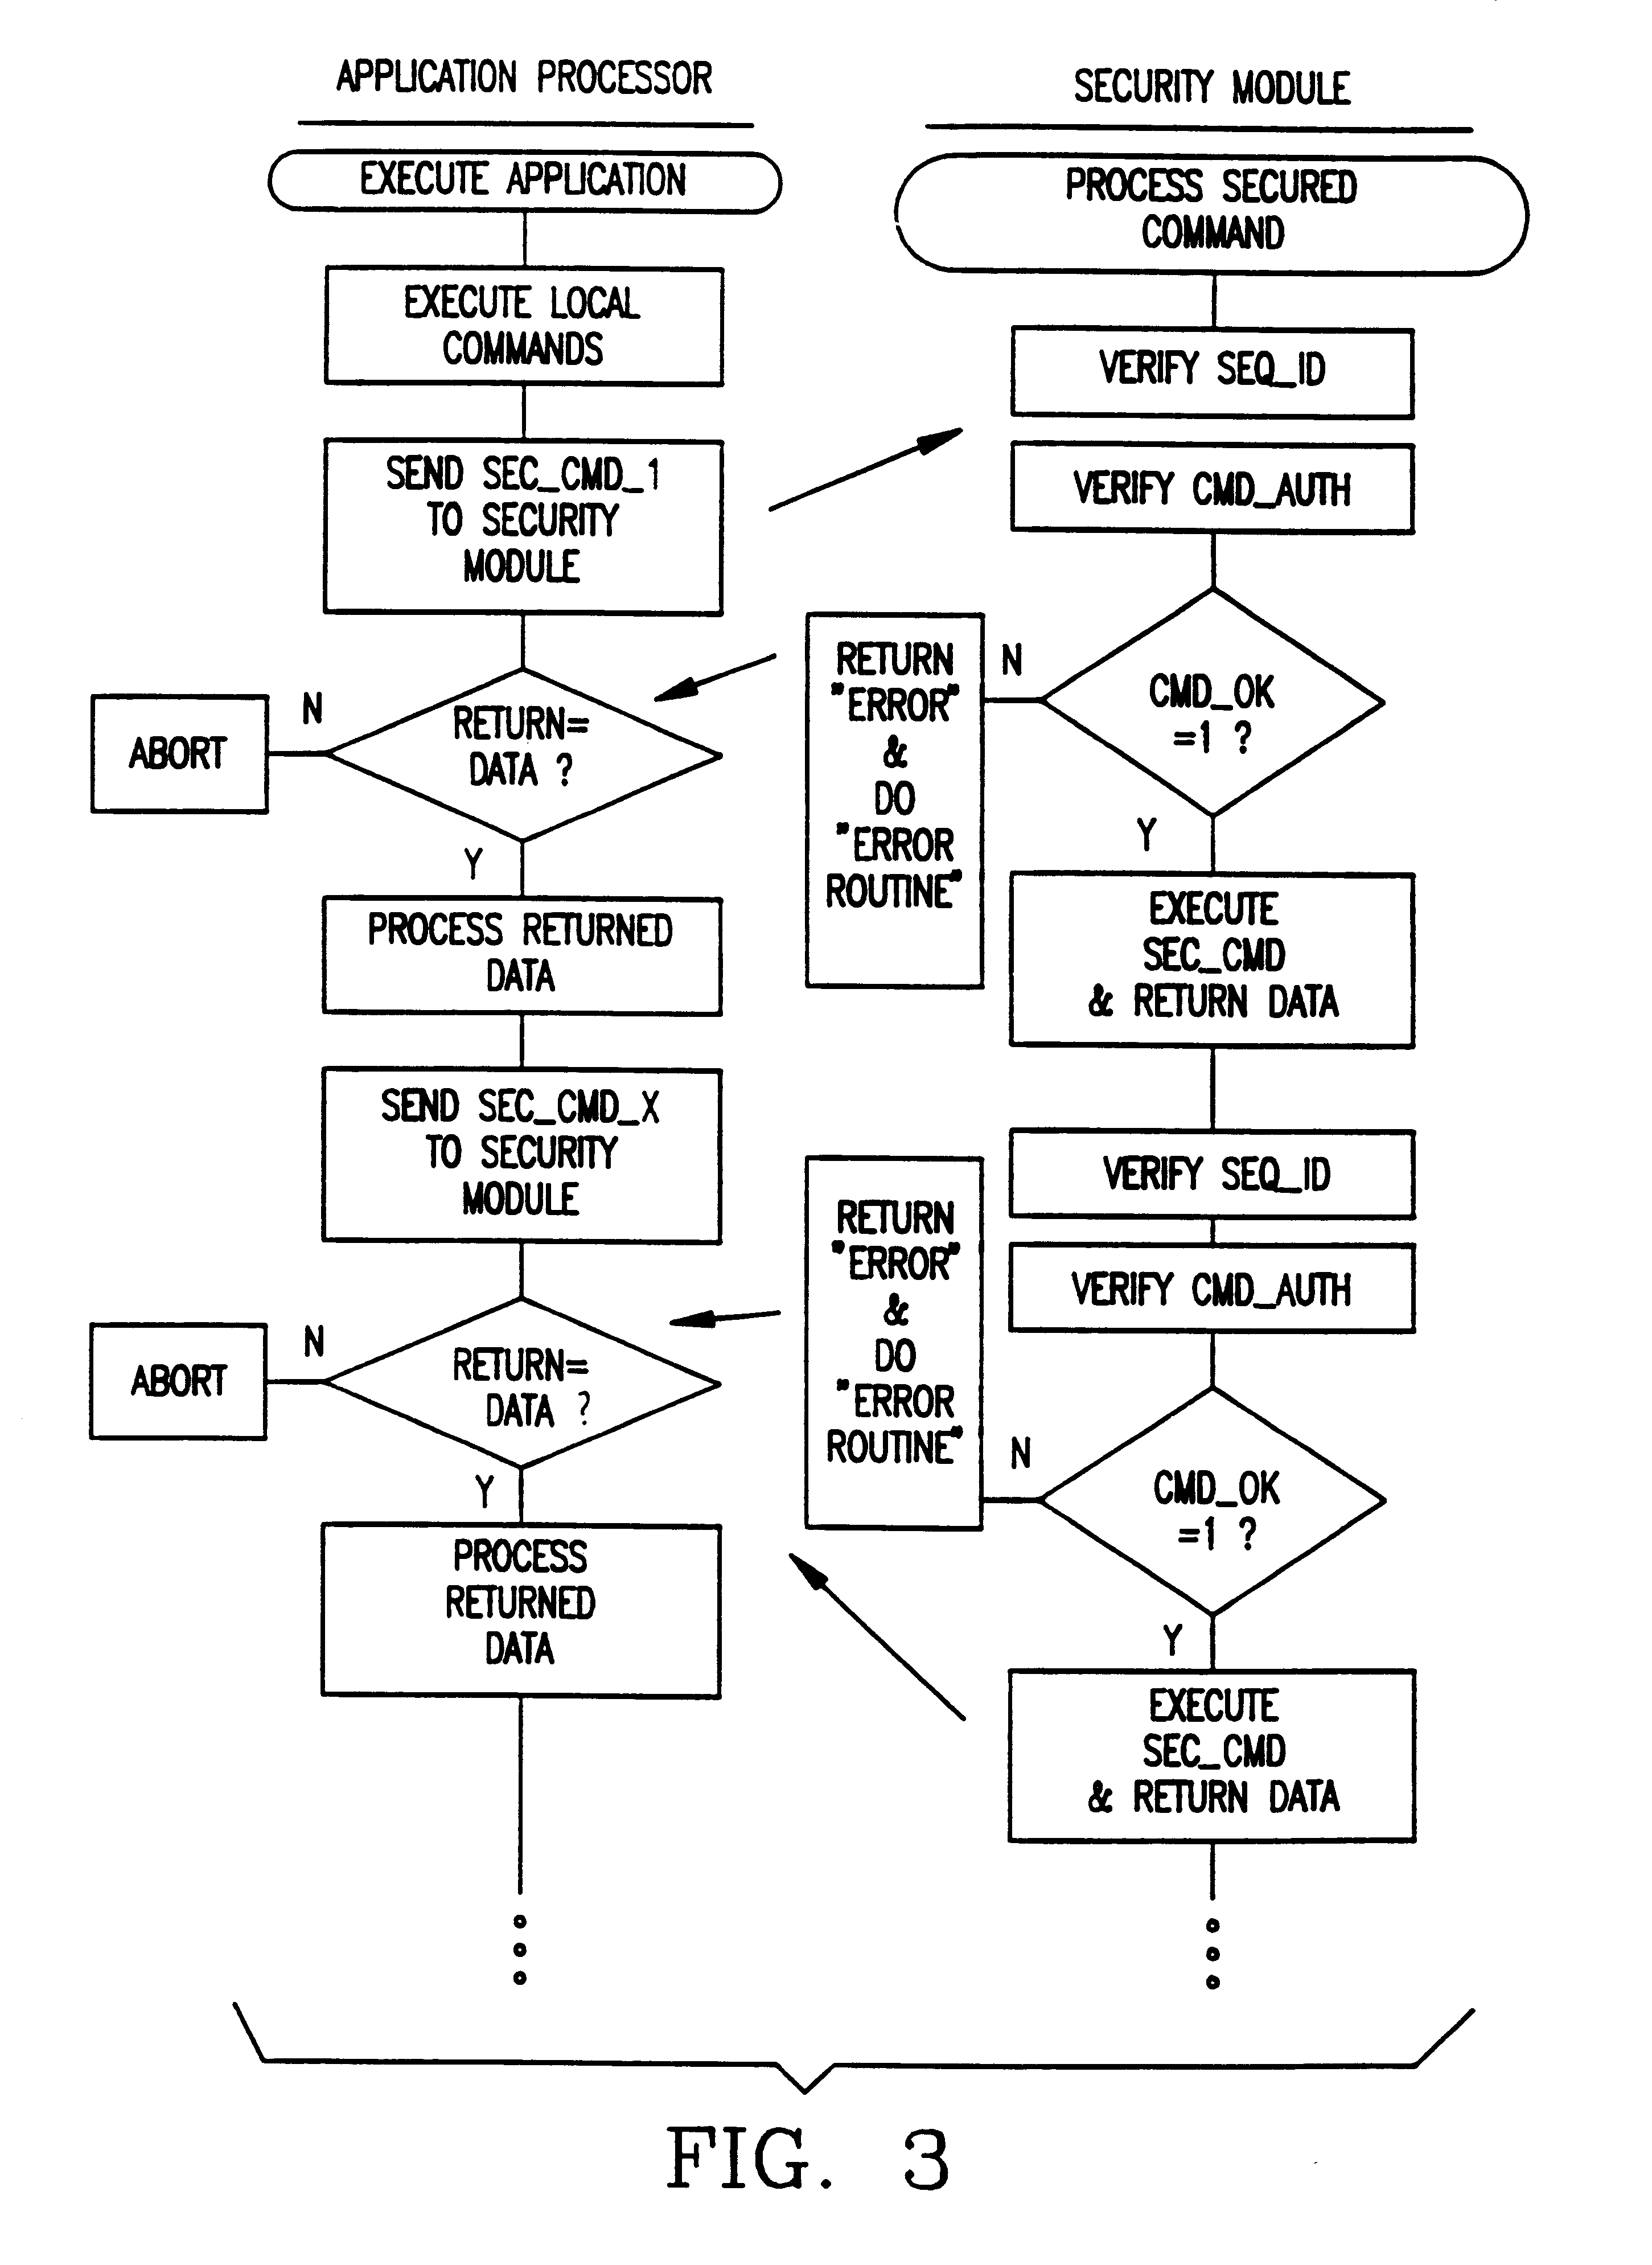 Method and apparatus for operating resources under control of a security module or other secure processor